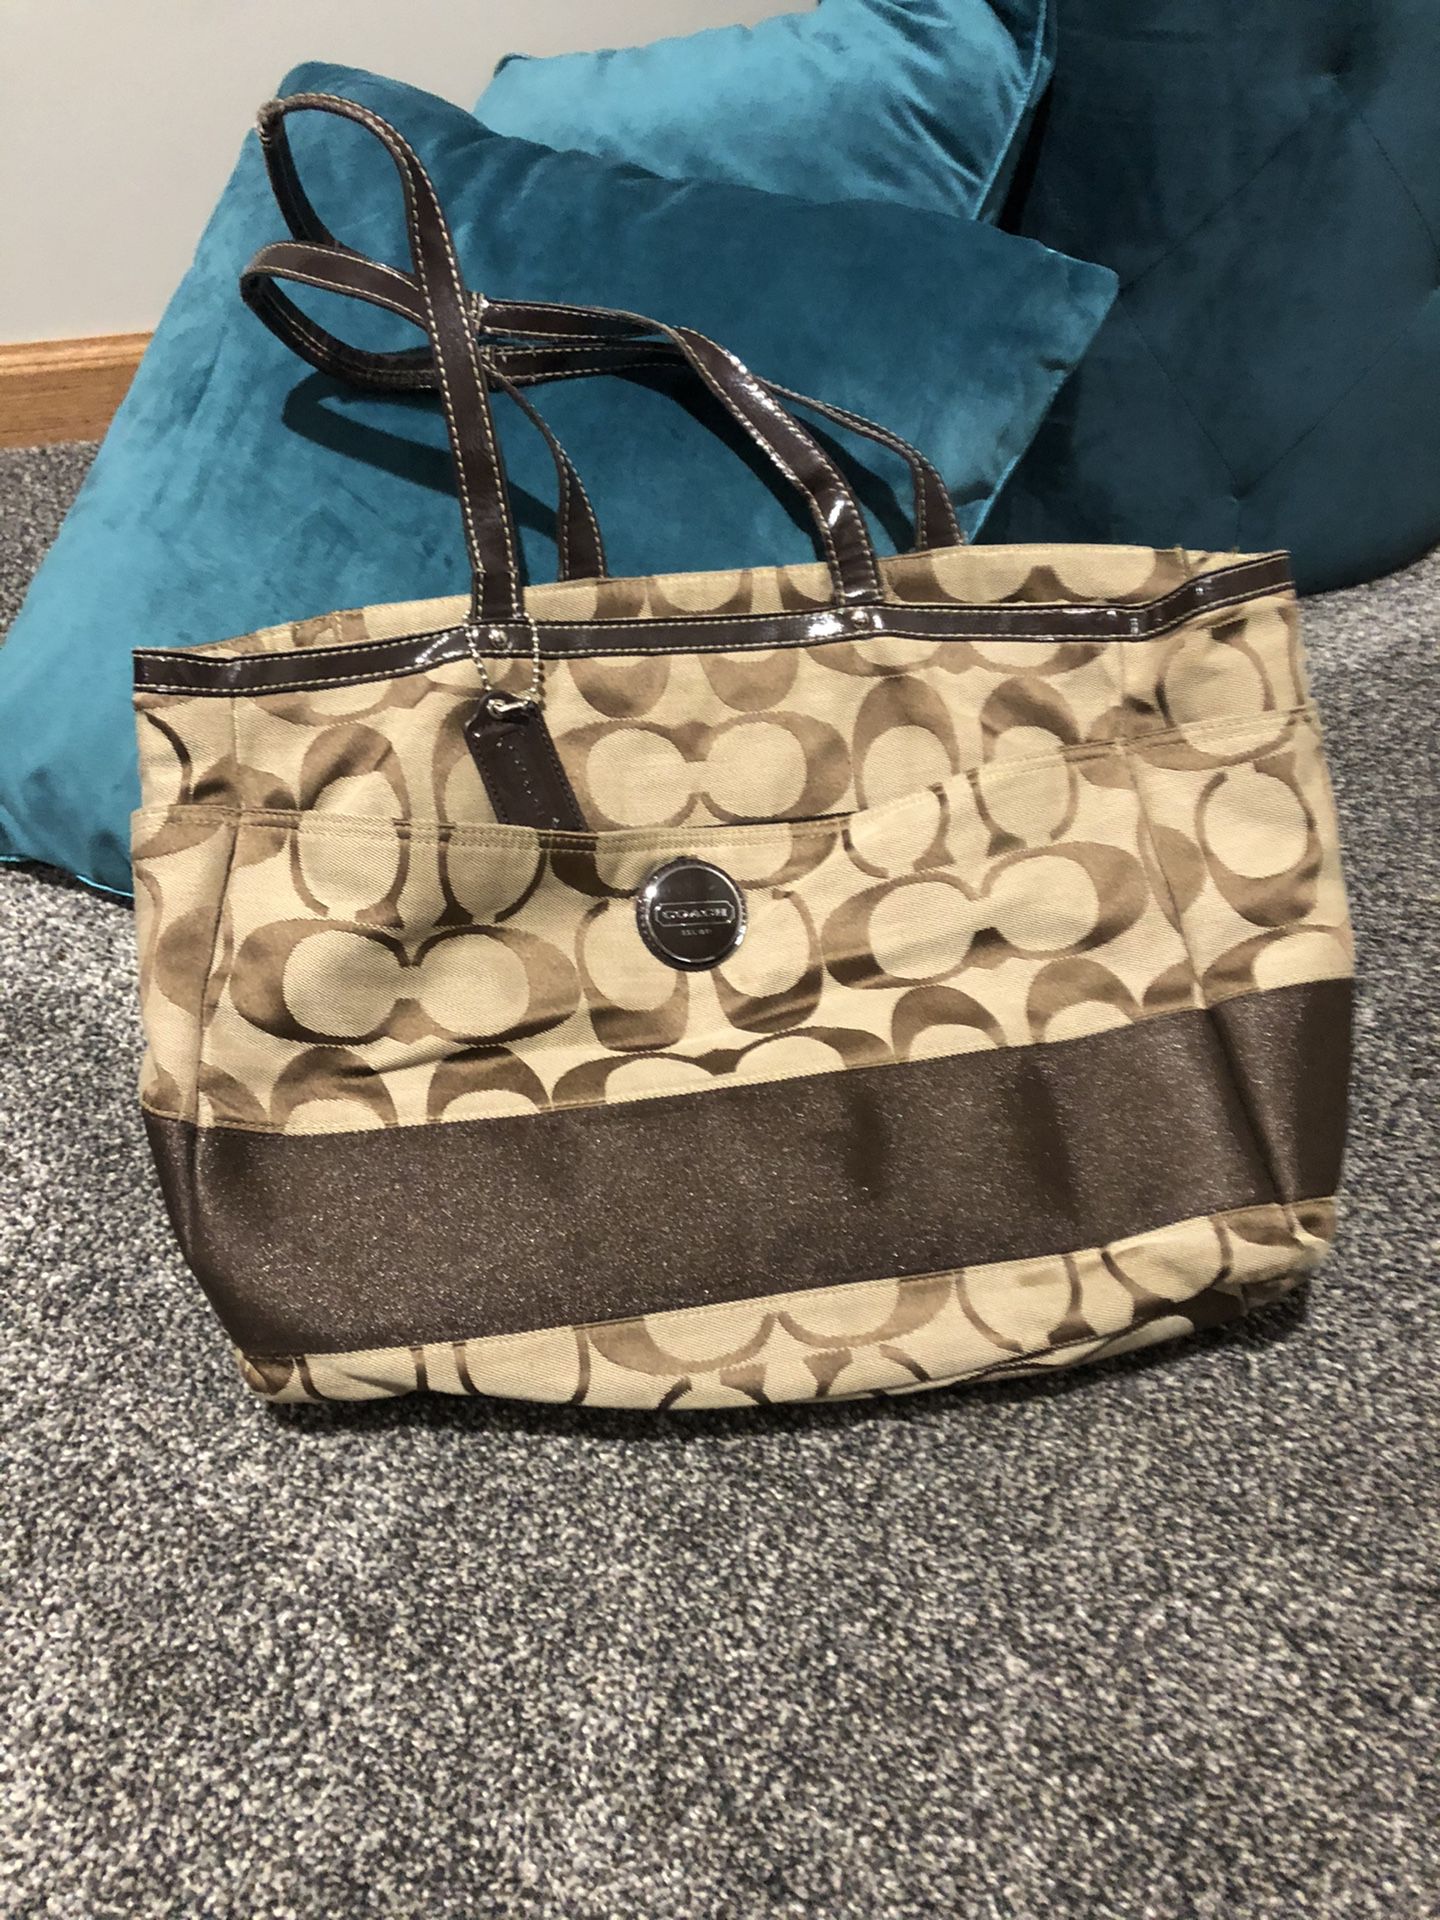 Coach tote bag and wallet